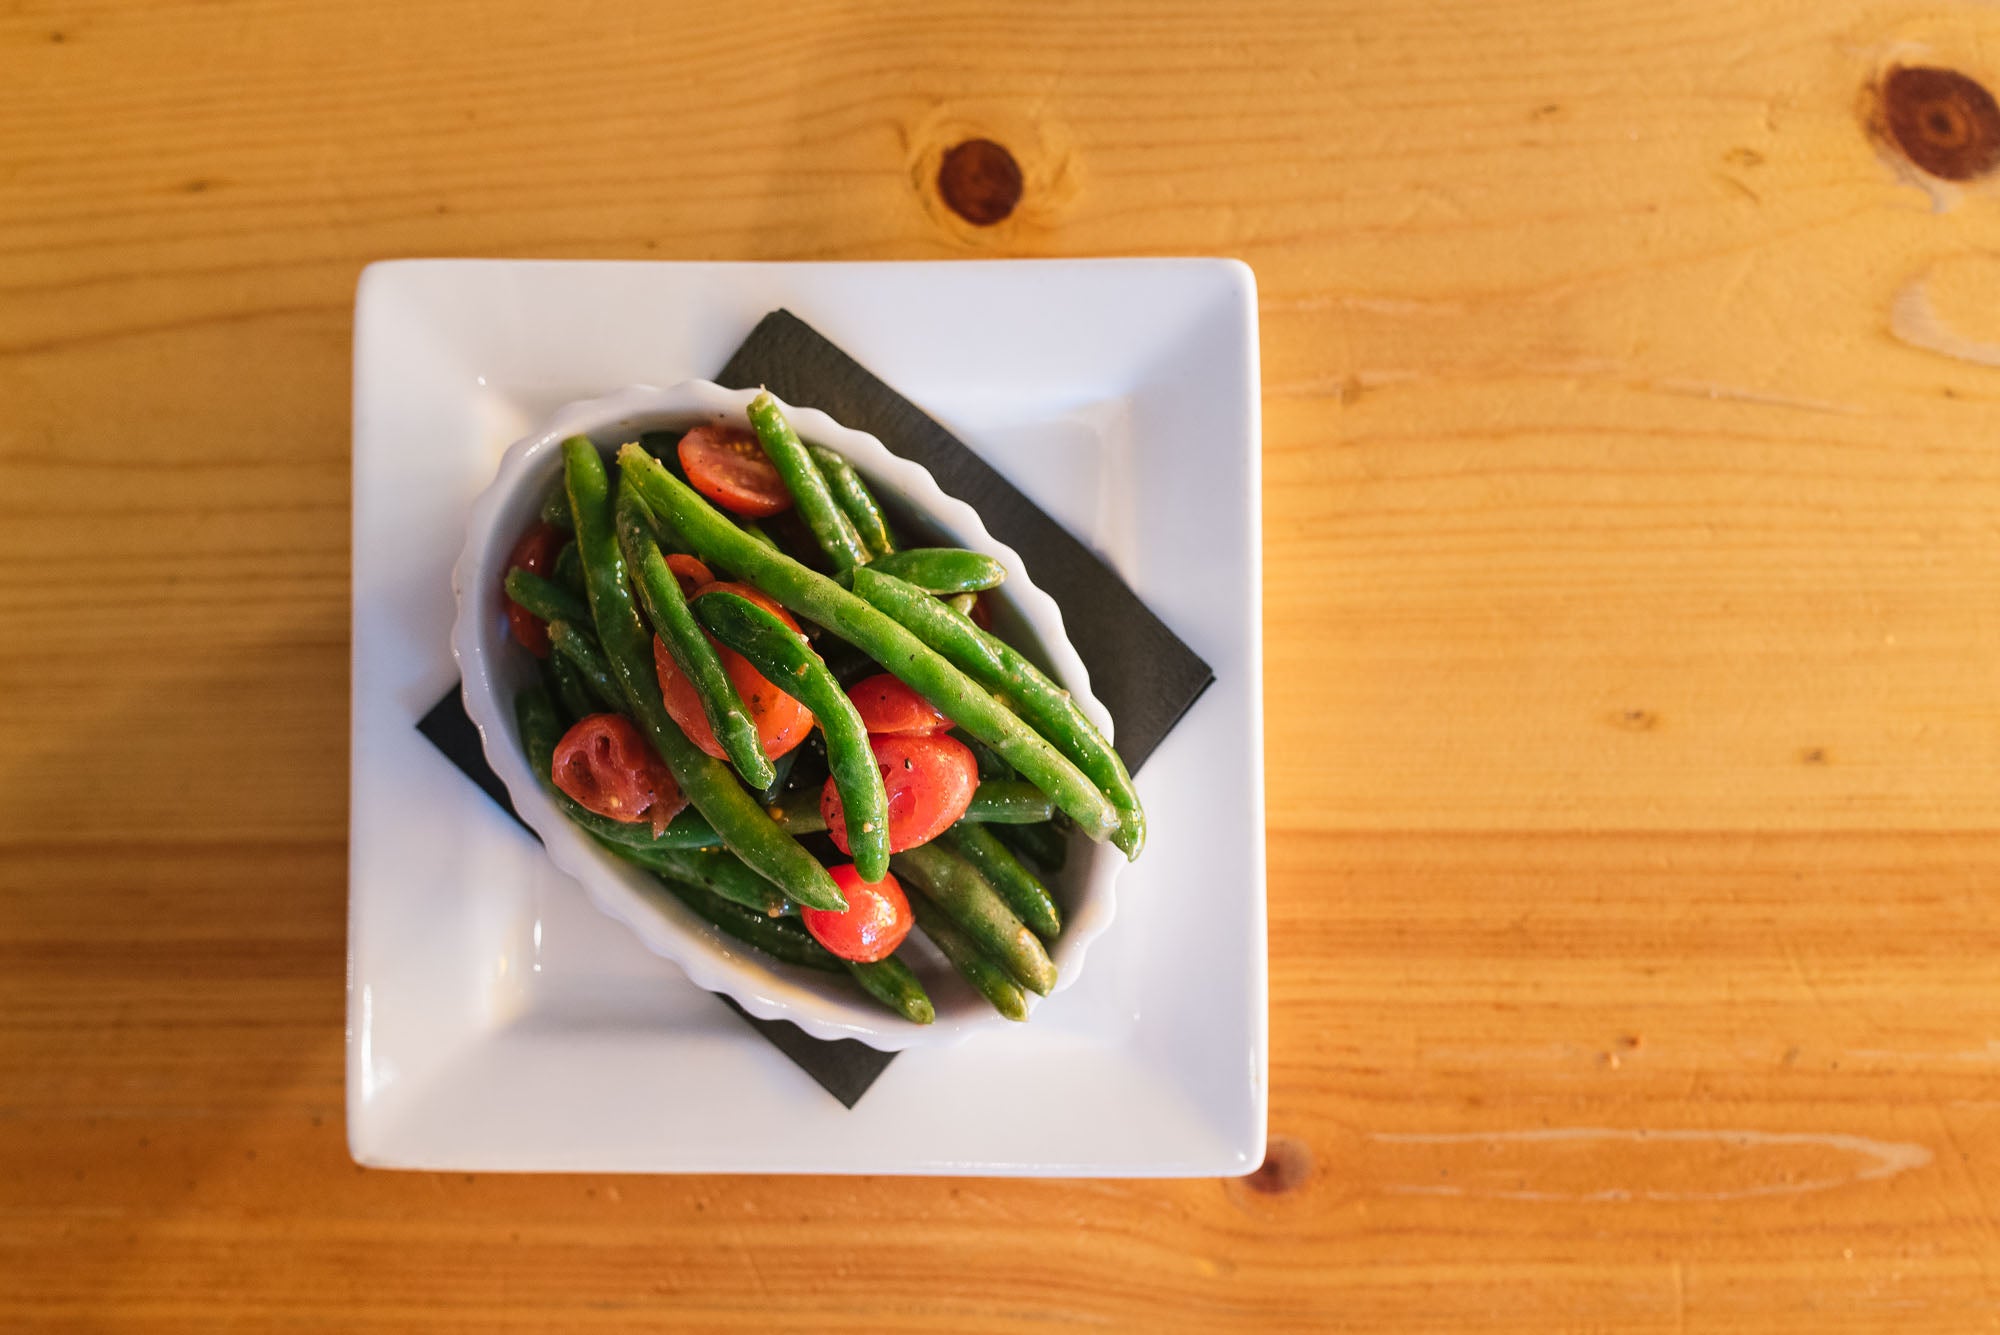 Green Beans and Tomato Salad